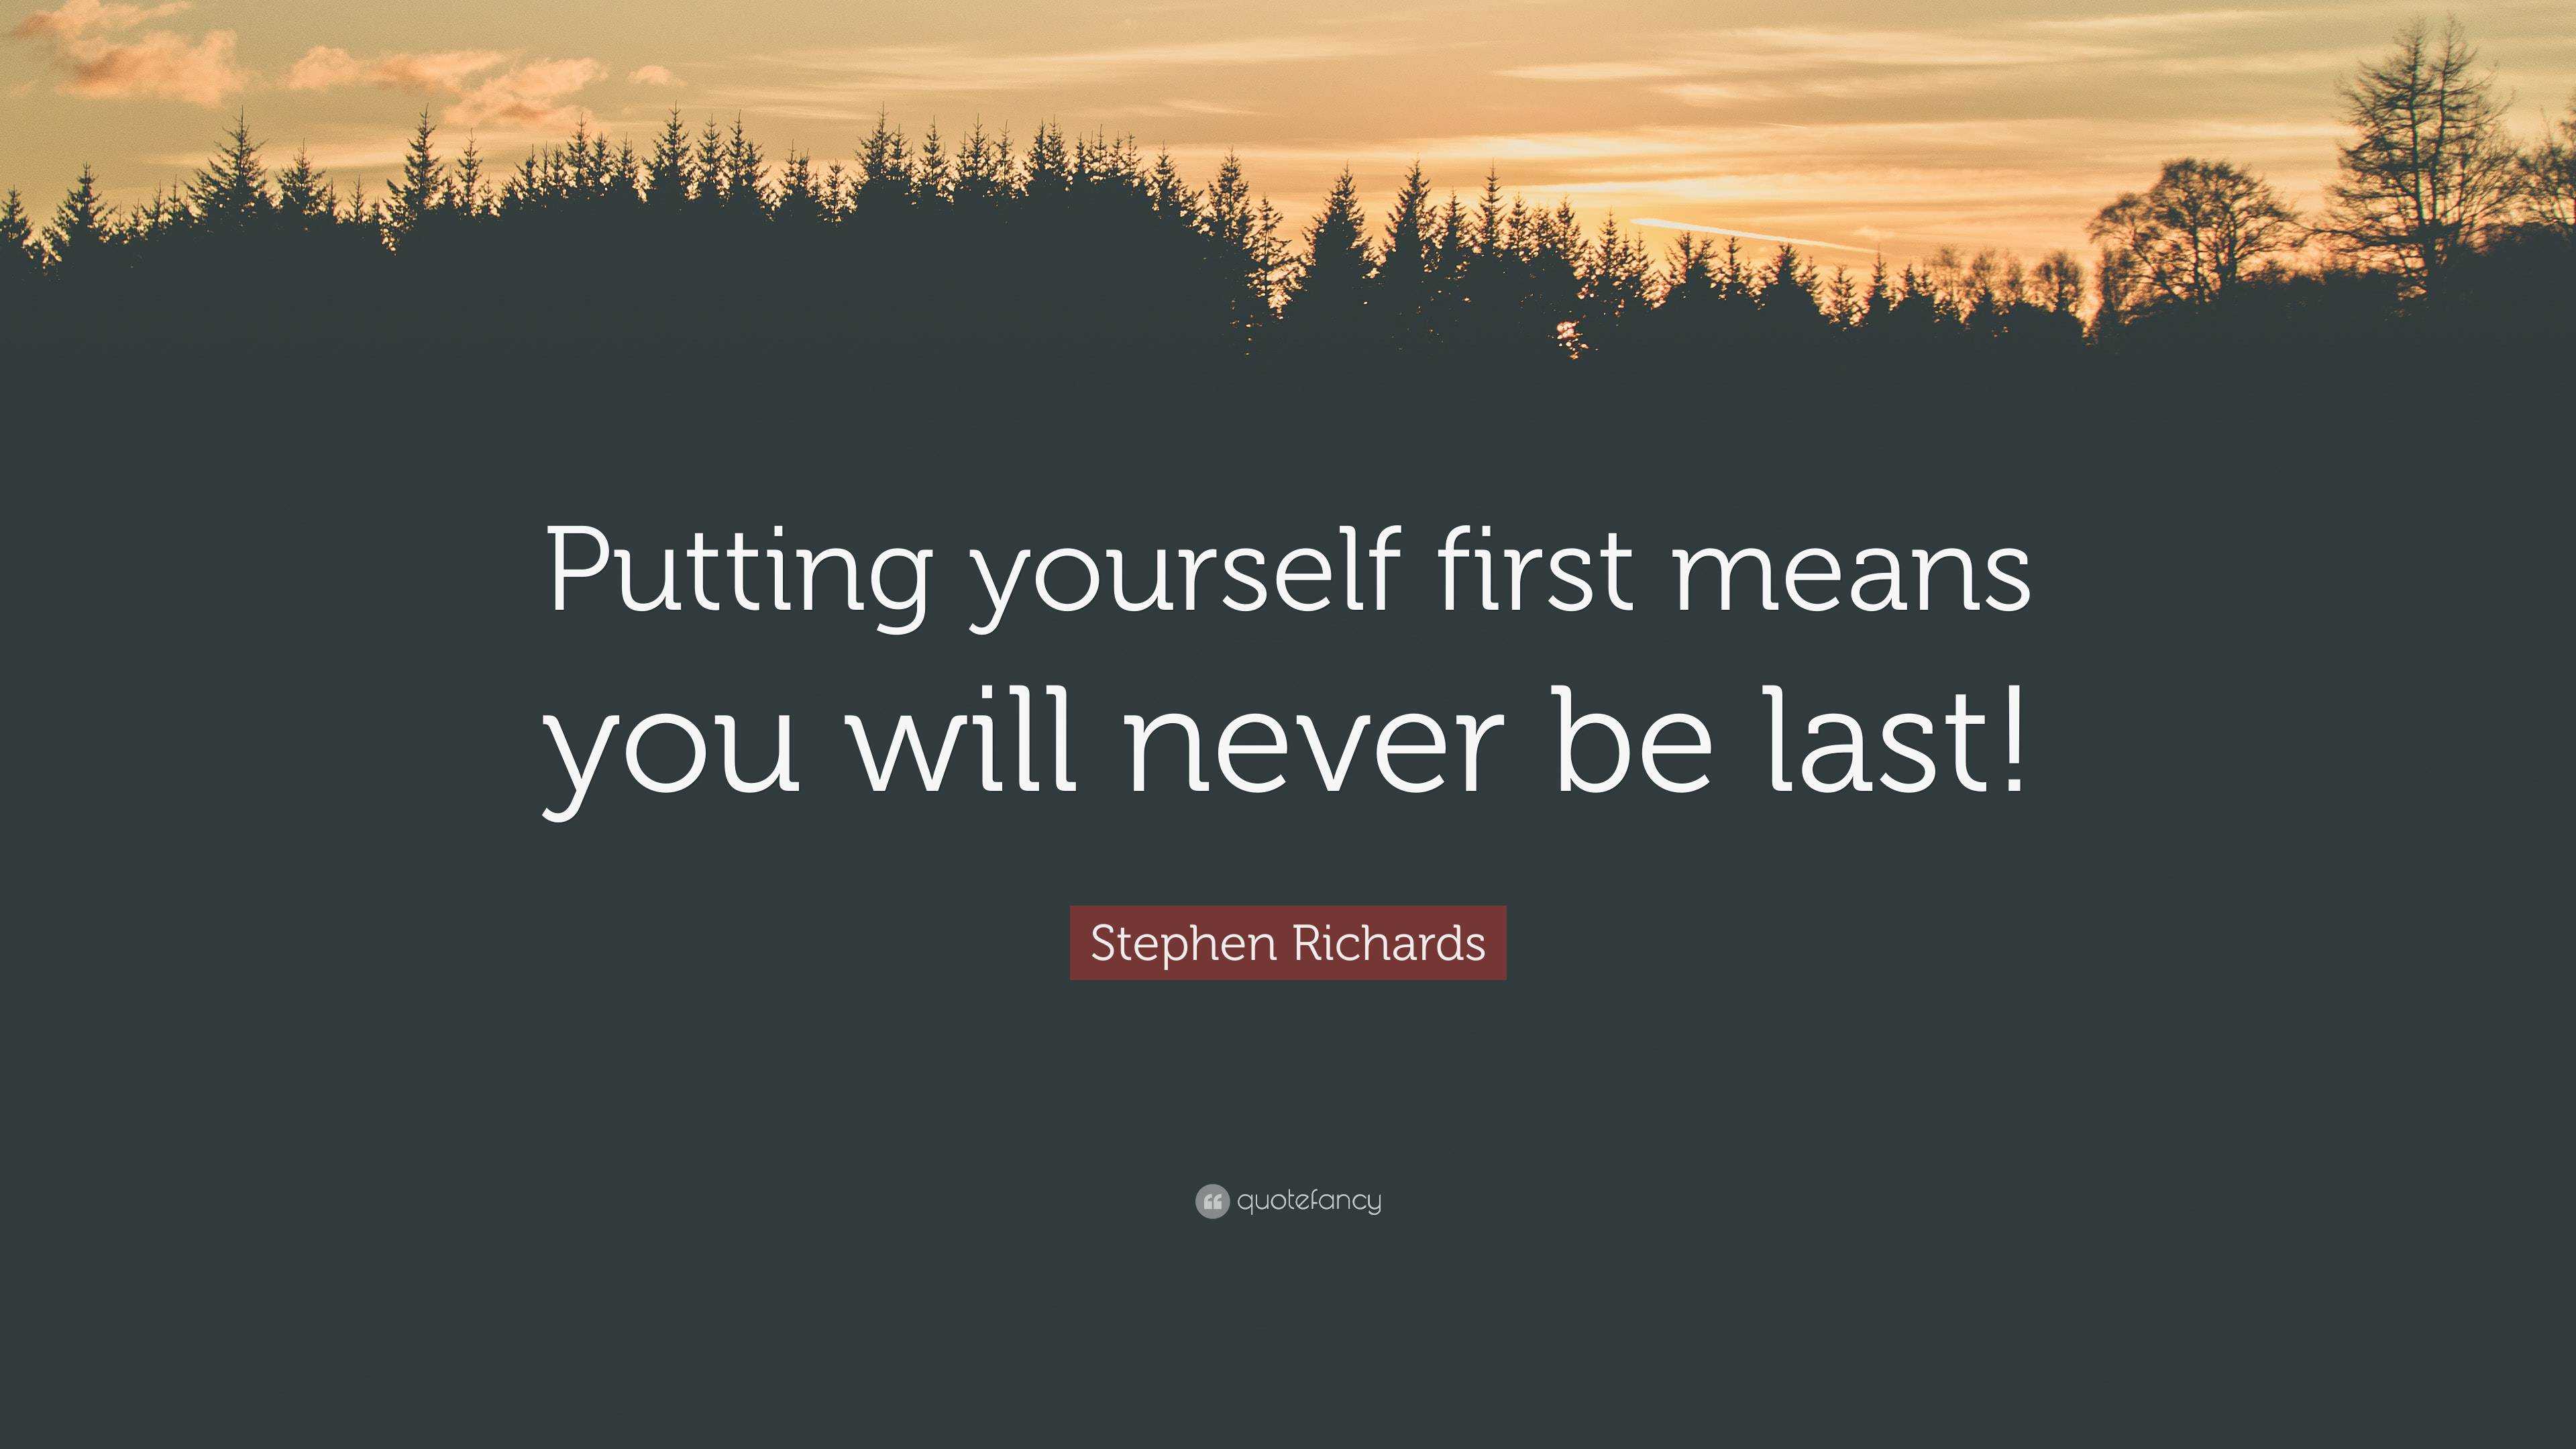 Stephen Richards Quote: “Putting yourself first means you will never be last !”